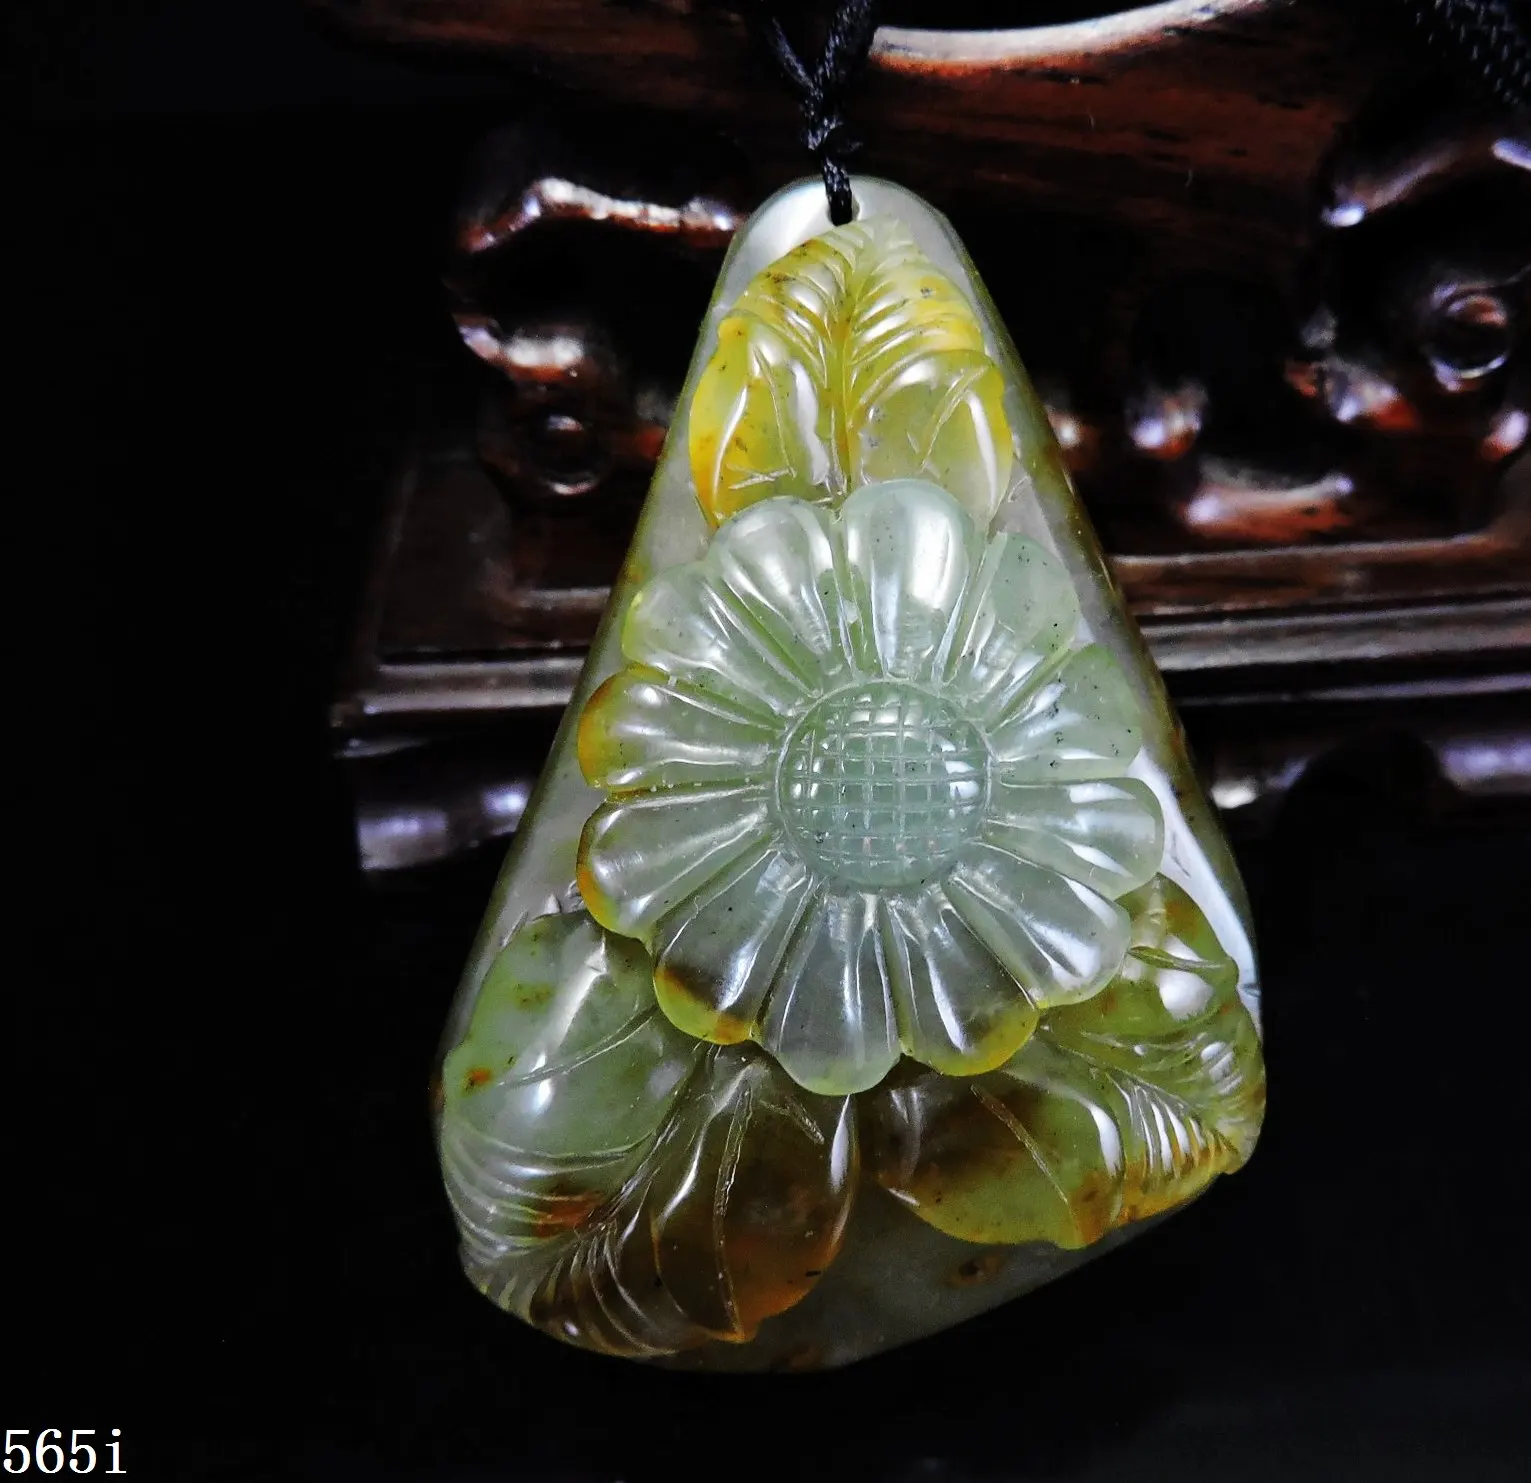 

Jade Jewelry Natural Jade Pendant Necklace Hand-Carved daisy flower Jadeite Necklace Pendant Gift No Treatment 565i